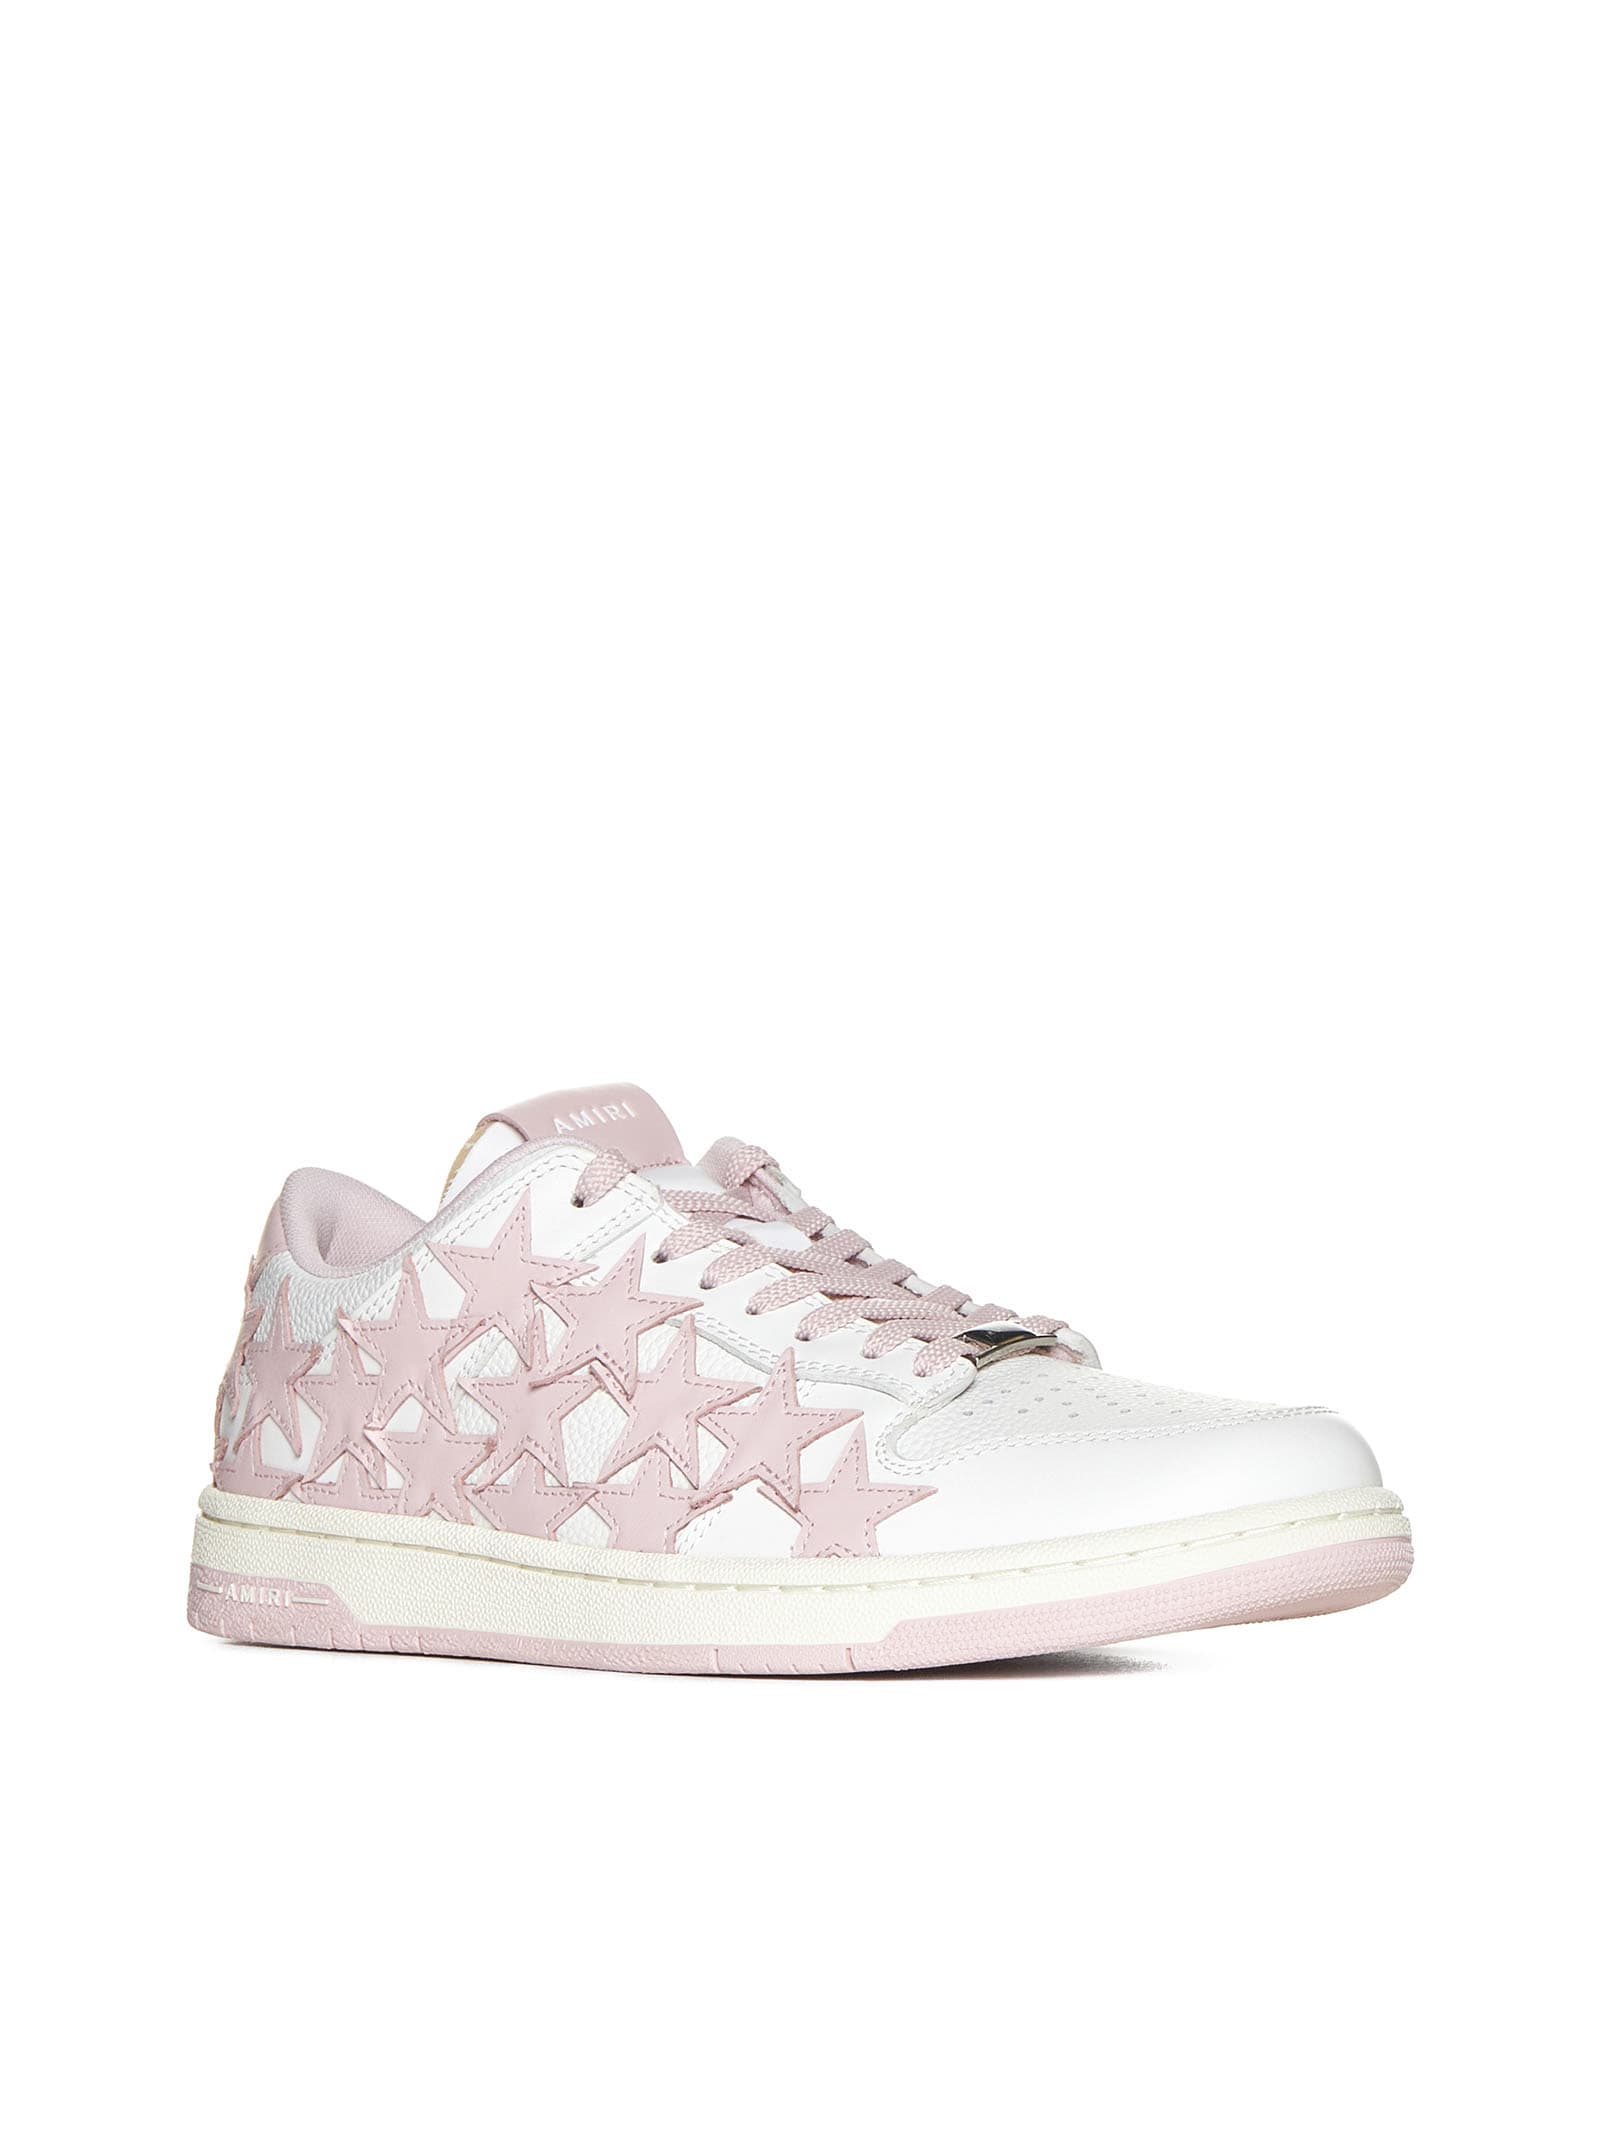 Shop Amiri Sneakers In White Pink